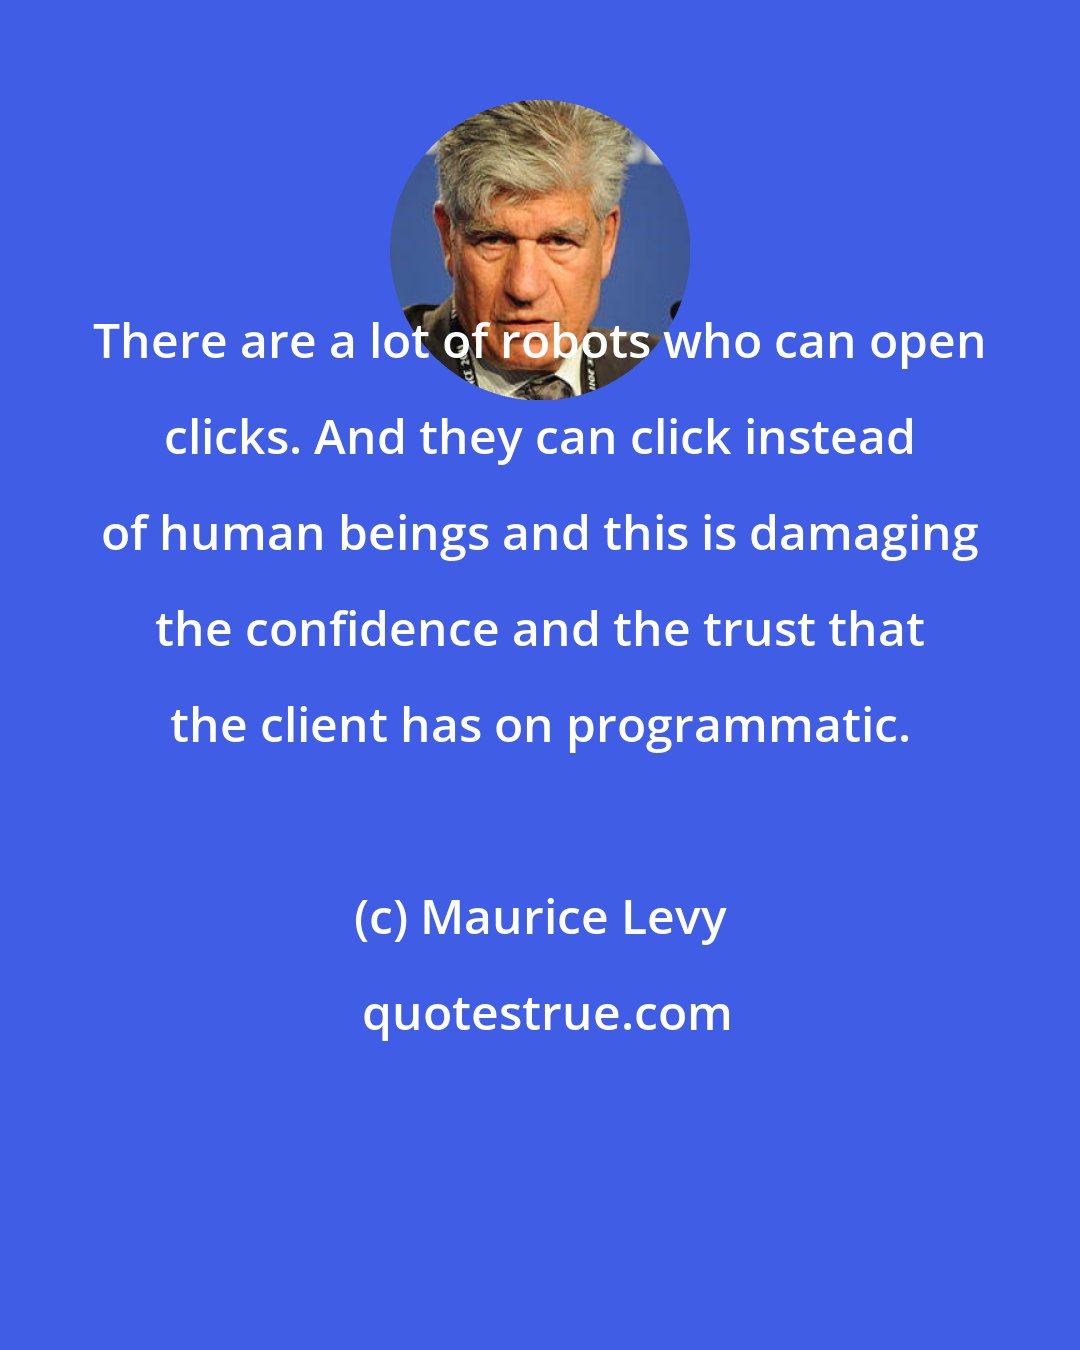 Maurice Levy: There are a lot of robots who can open clicks. And they can click instead of human beings and this is damaging the confidence and the trust that the client has on programmatic.